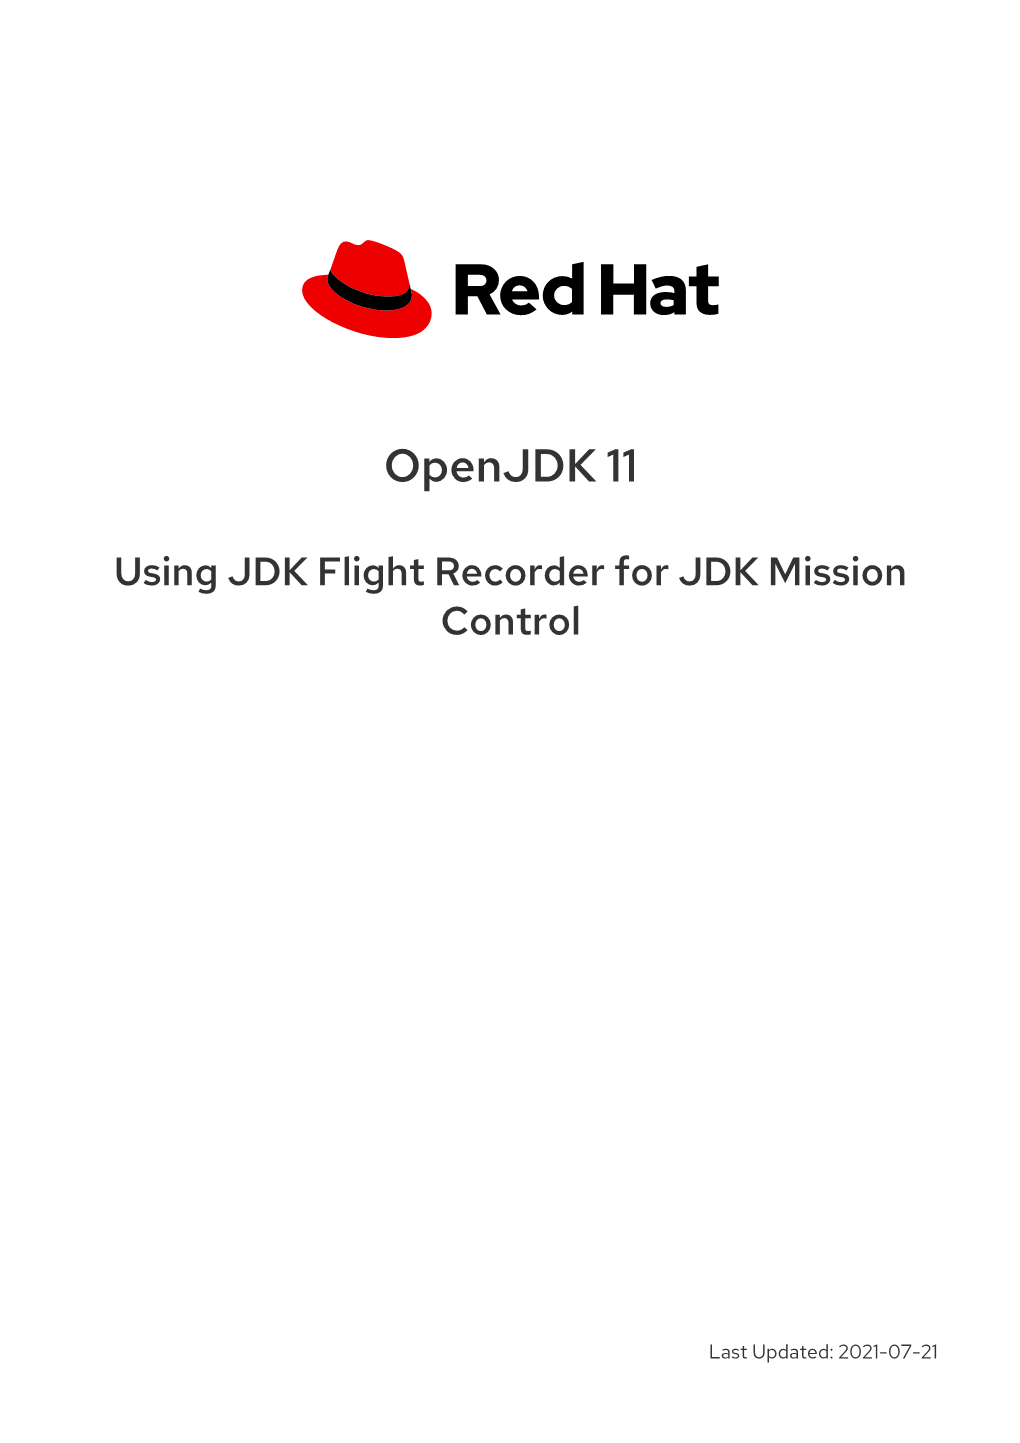 Openjdk 11 Using JDK Flight Recorder for JDK Mission Control Legal Notice